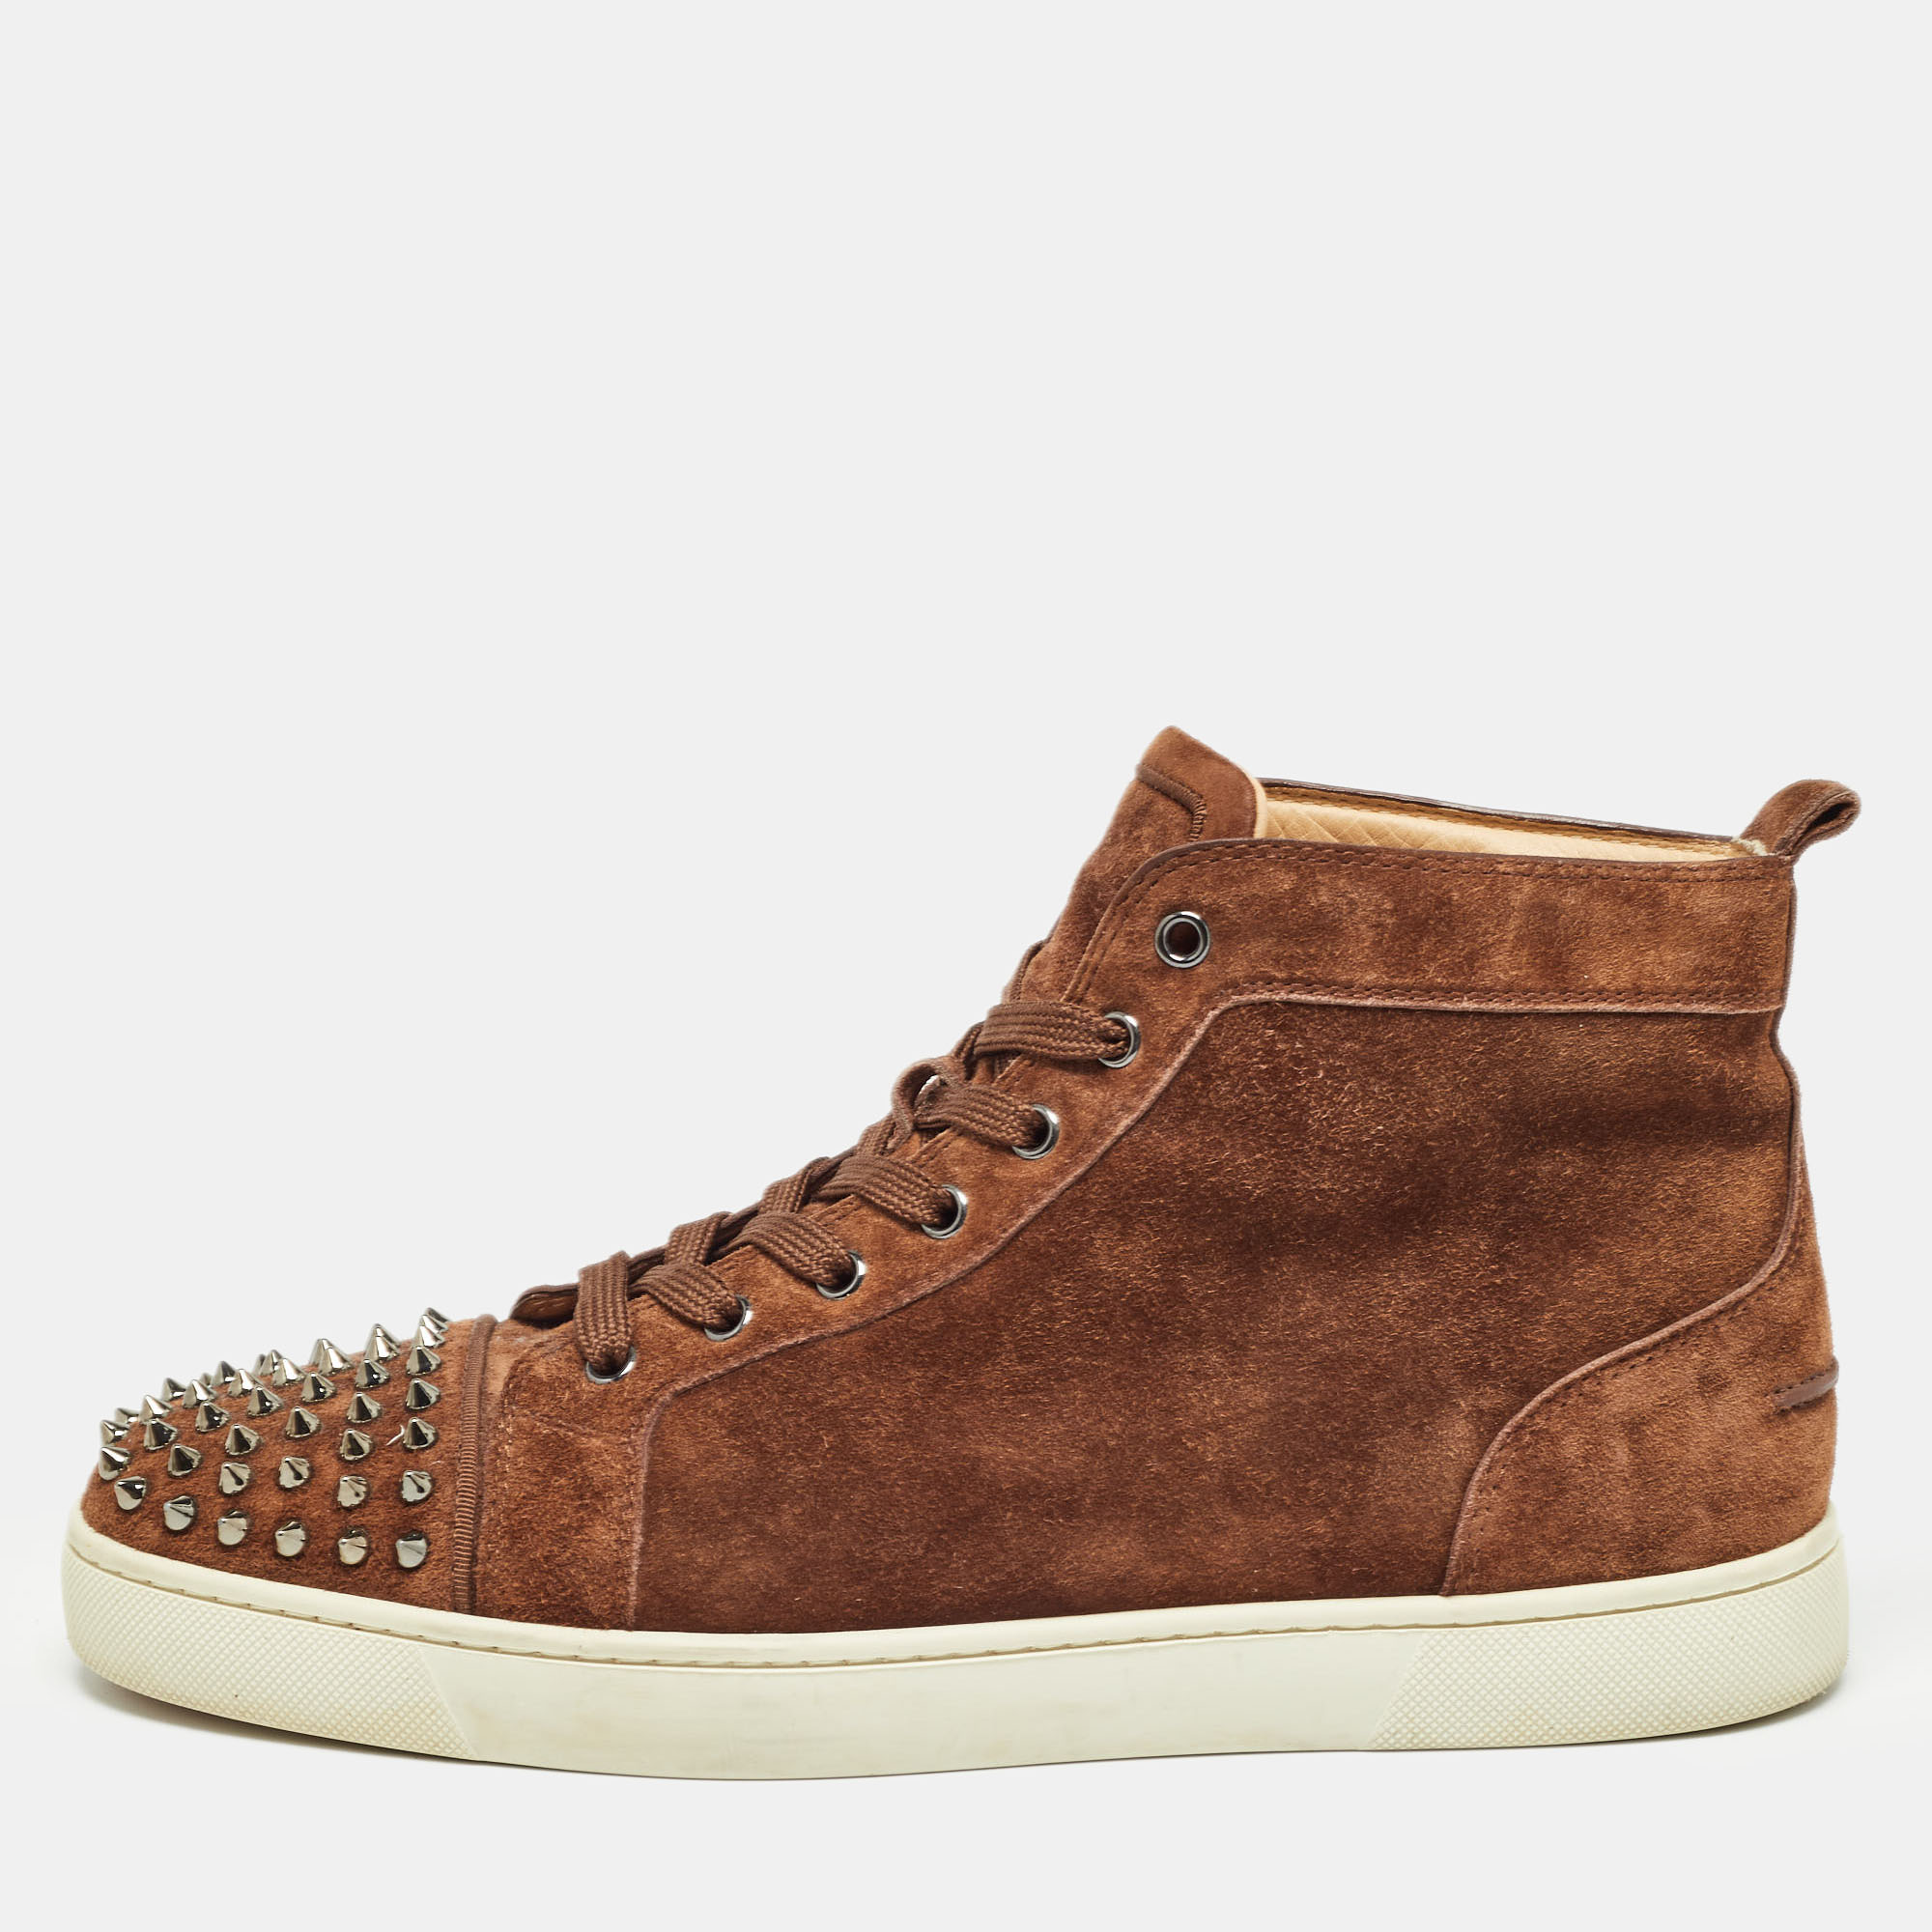 The addition of spikes makes these Christian Louboutin sneakers undeniably chic and striking. They are created from brown suede with lace up vamps pull tab at the counters and comfortable soles.